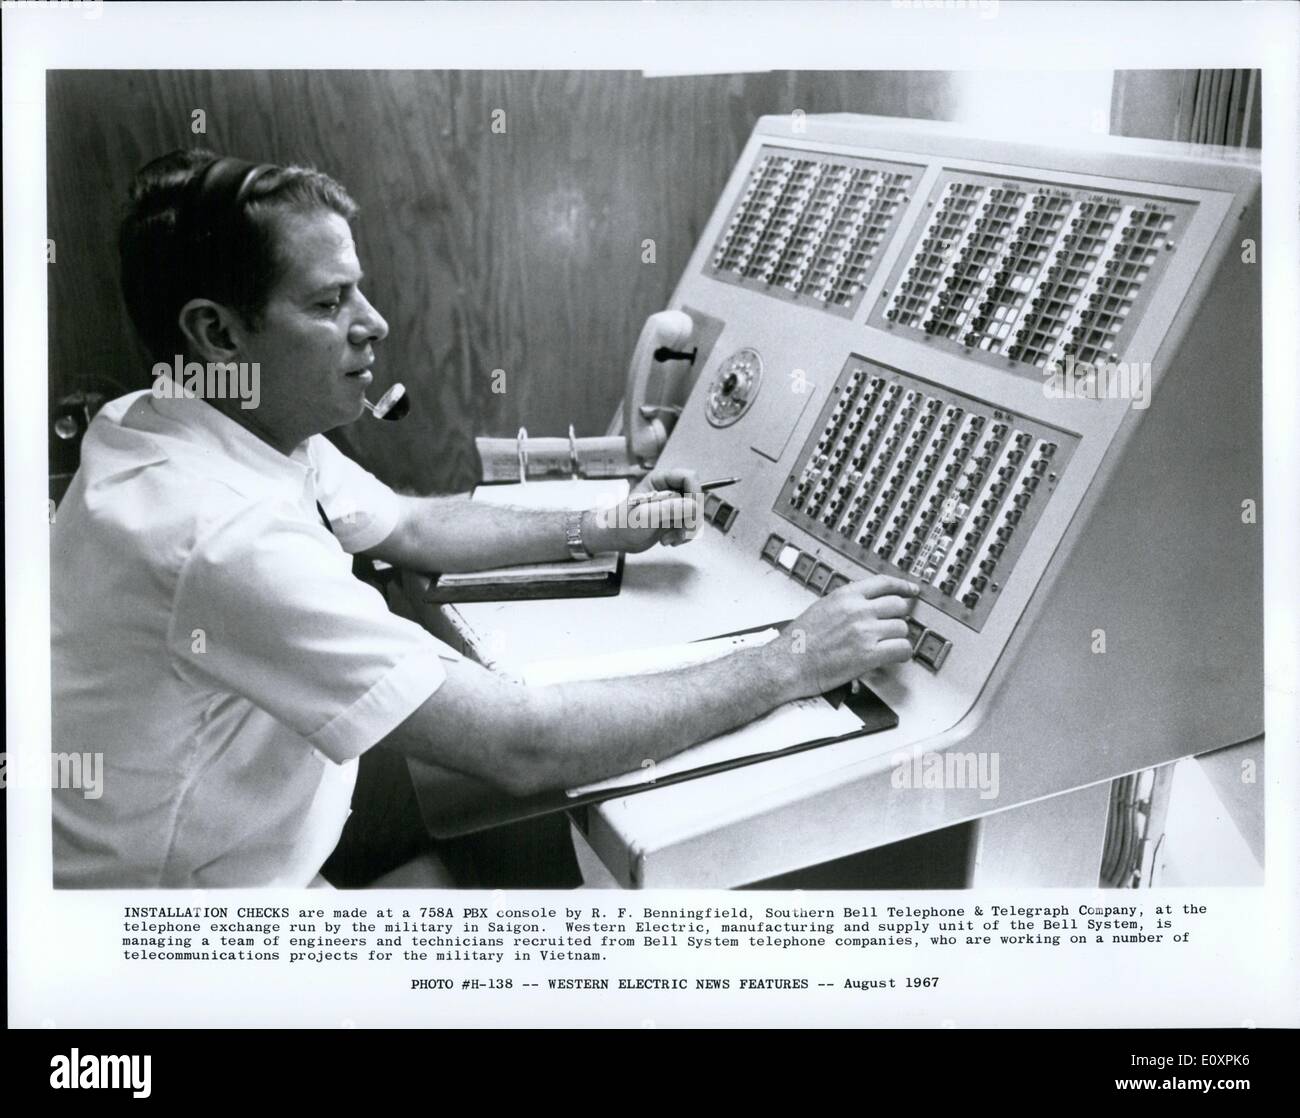 Aug. 08, 1967 - Installation Checks are made at a 758A PBX console by R. F. Benningfield, Southern Bell Telephone & Telegraph Company, at the telephone exchange run by the military in Saigon. Western Electric, manufacturing and supply unit of the Bell System, is managing a team of engineers and technicians recruited from Bell System telephone companies, who are working on a number of telecommunications projects for the military in Vietnam. Stock Photo